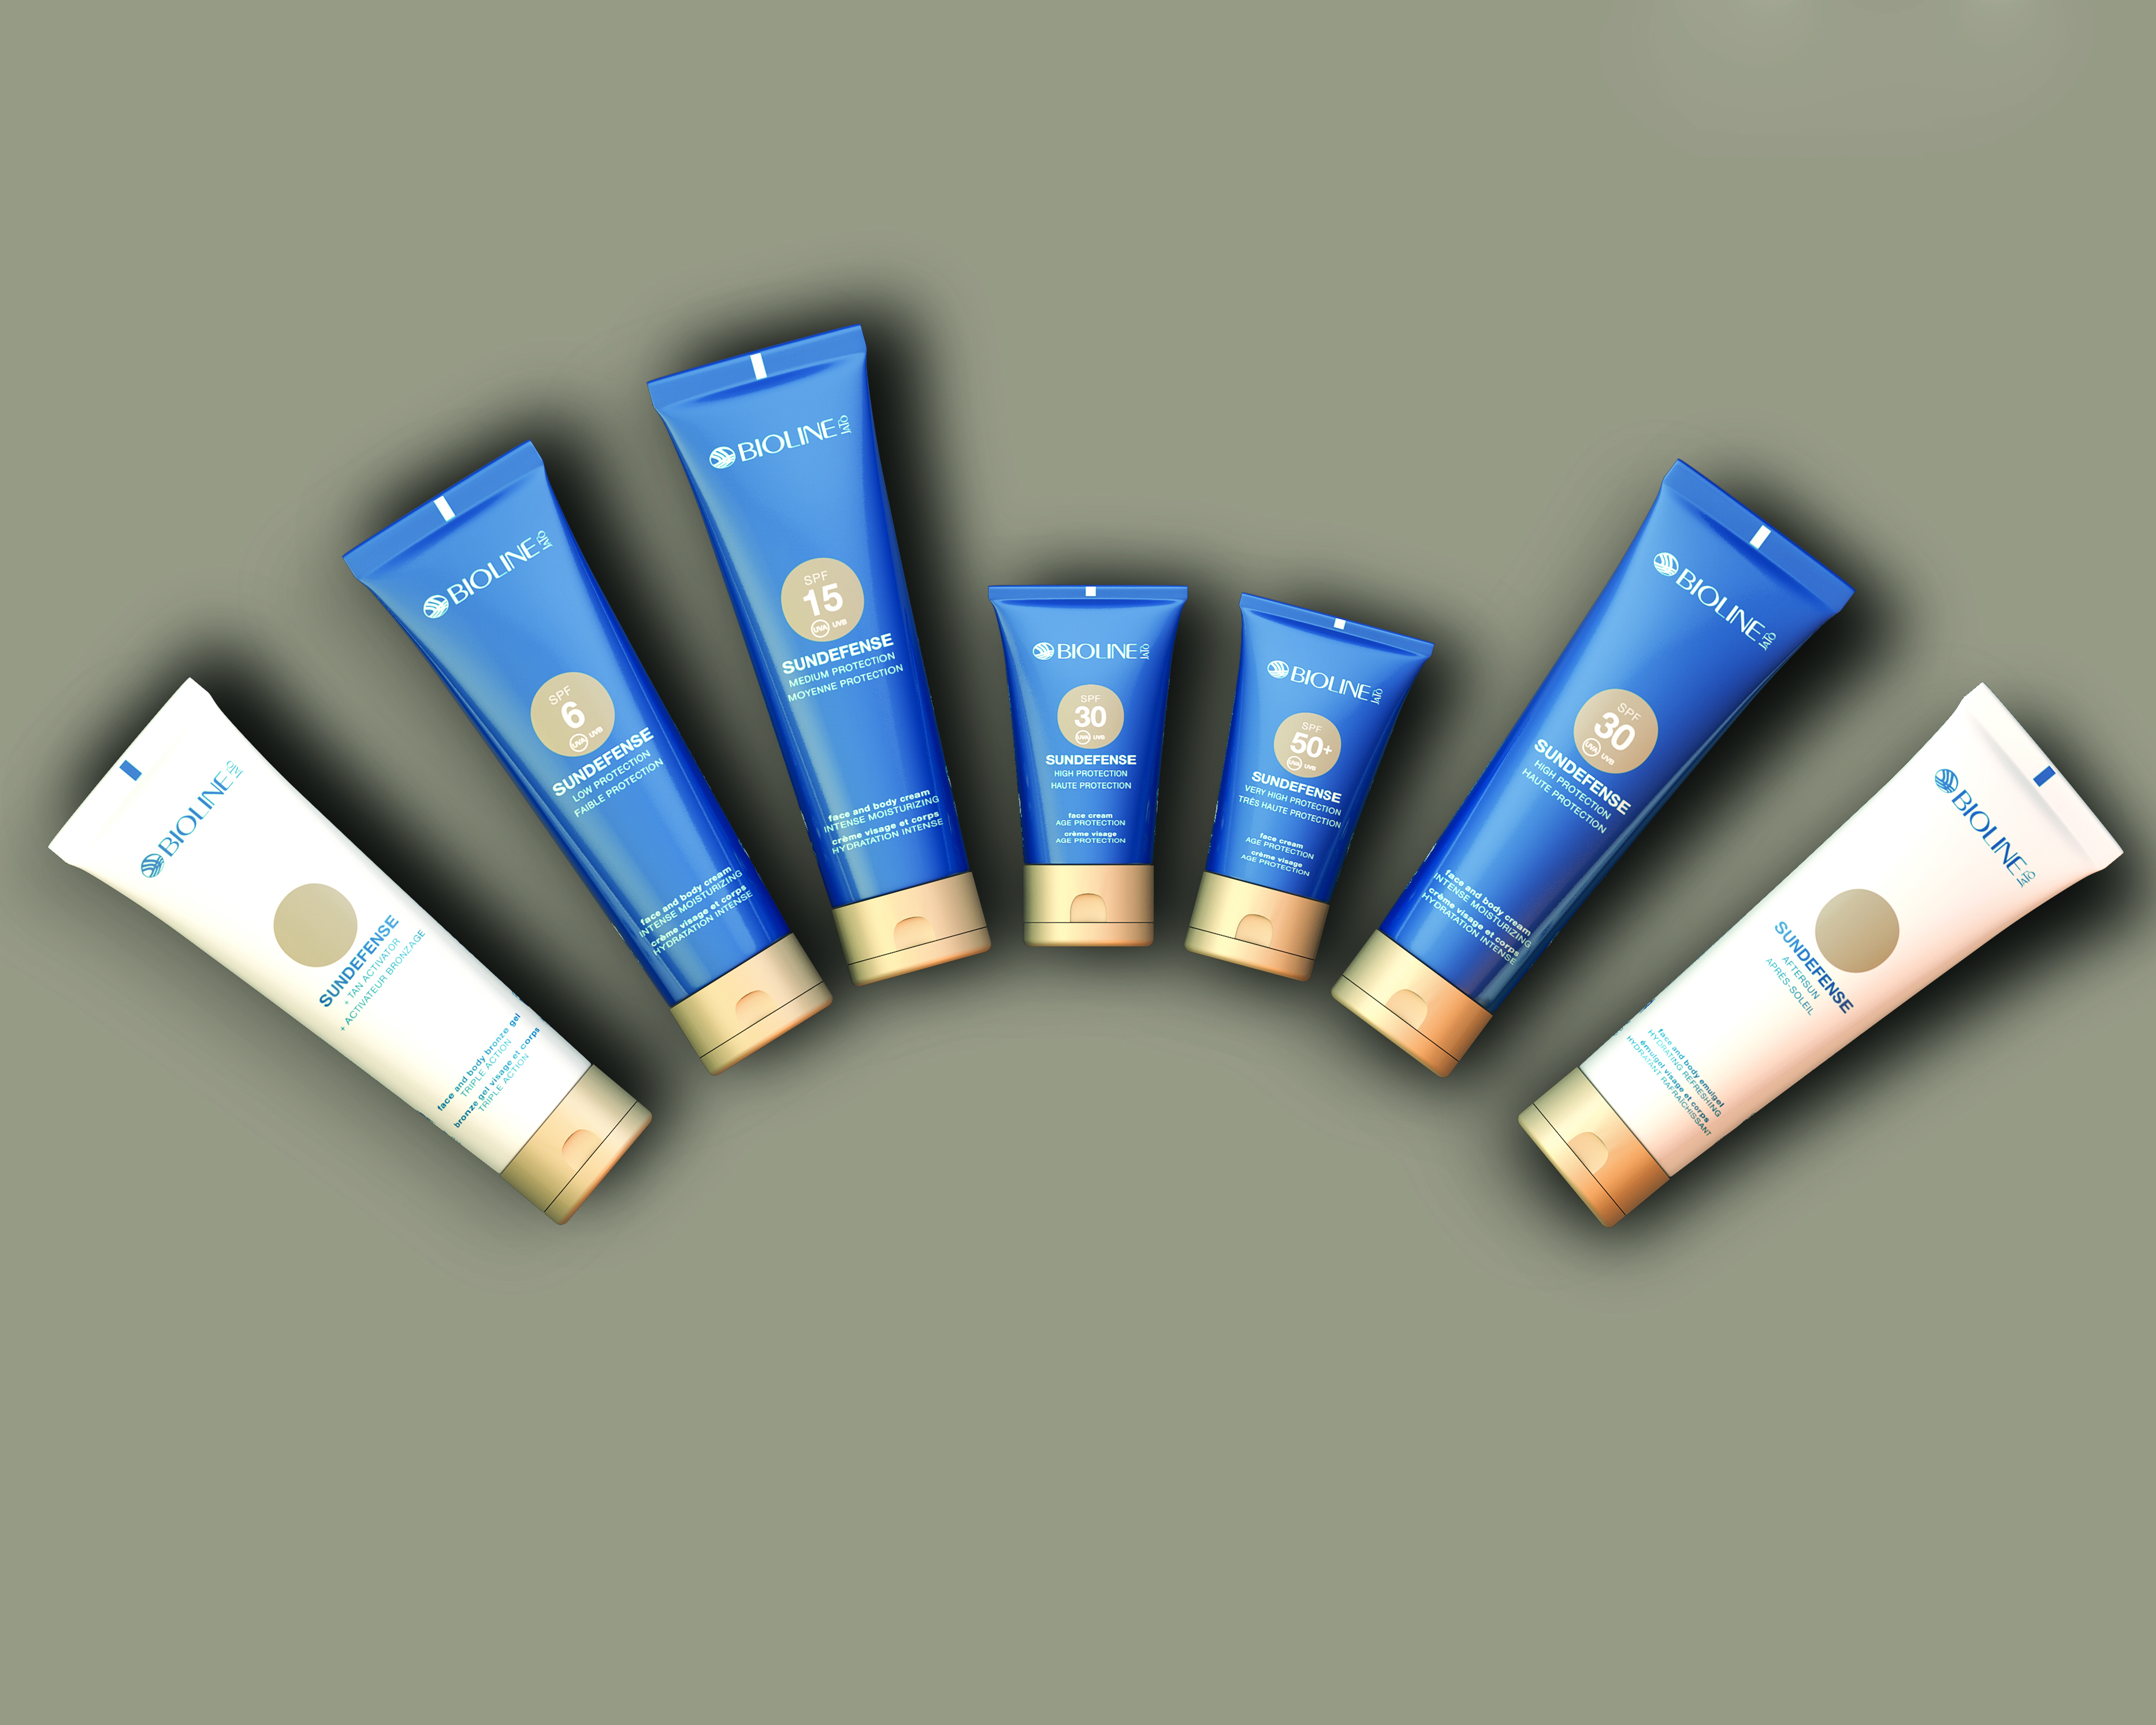 Bioline Jatò launches new sun care line with exclusive 'Safe Sun' technology 